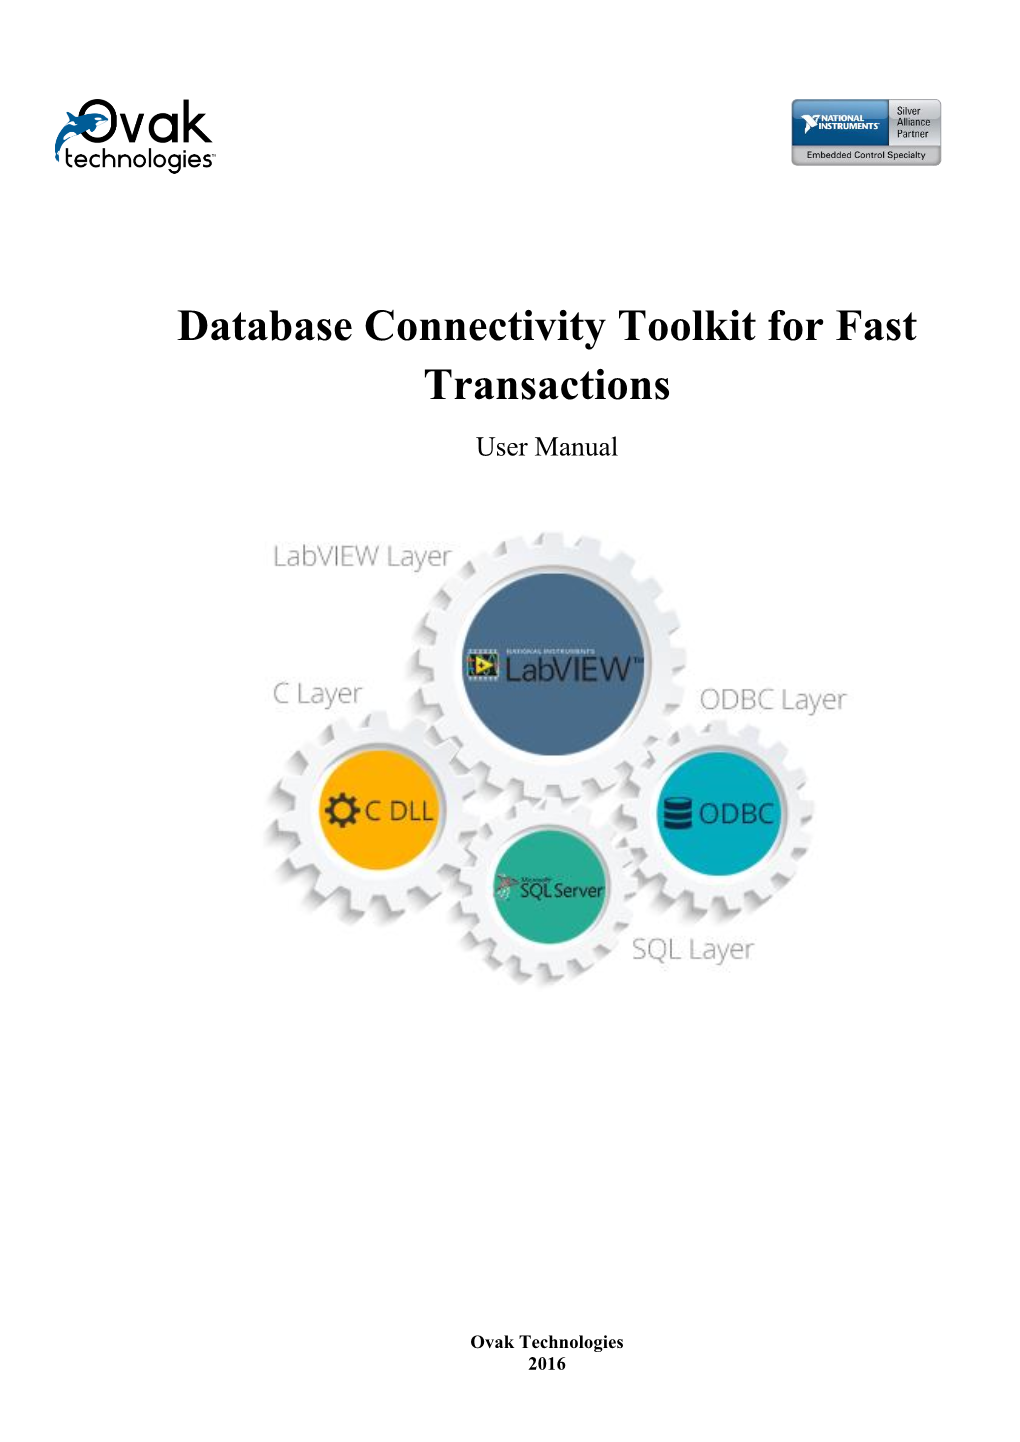 Database Connectivity Toolkit for Fast Transactions User Manual